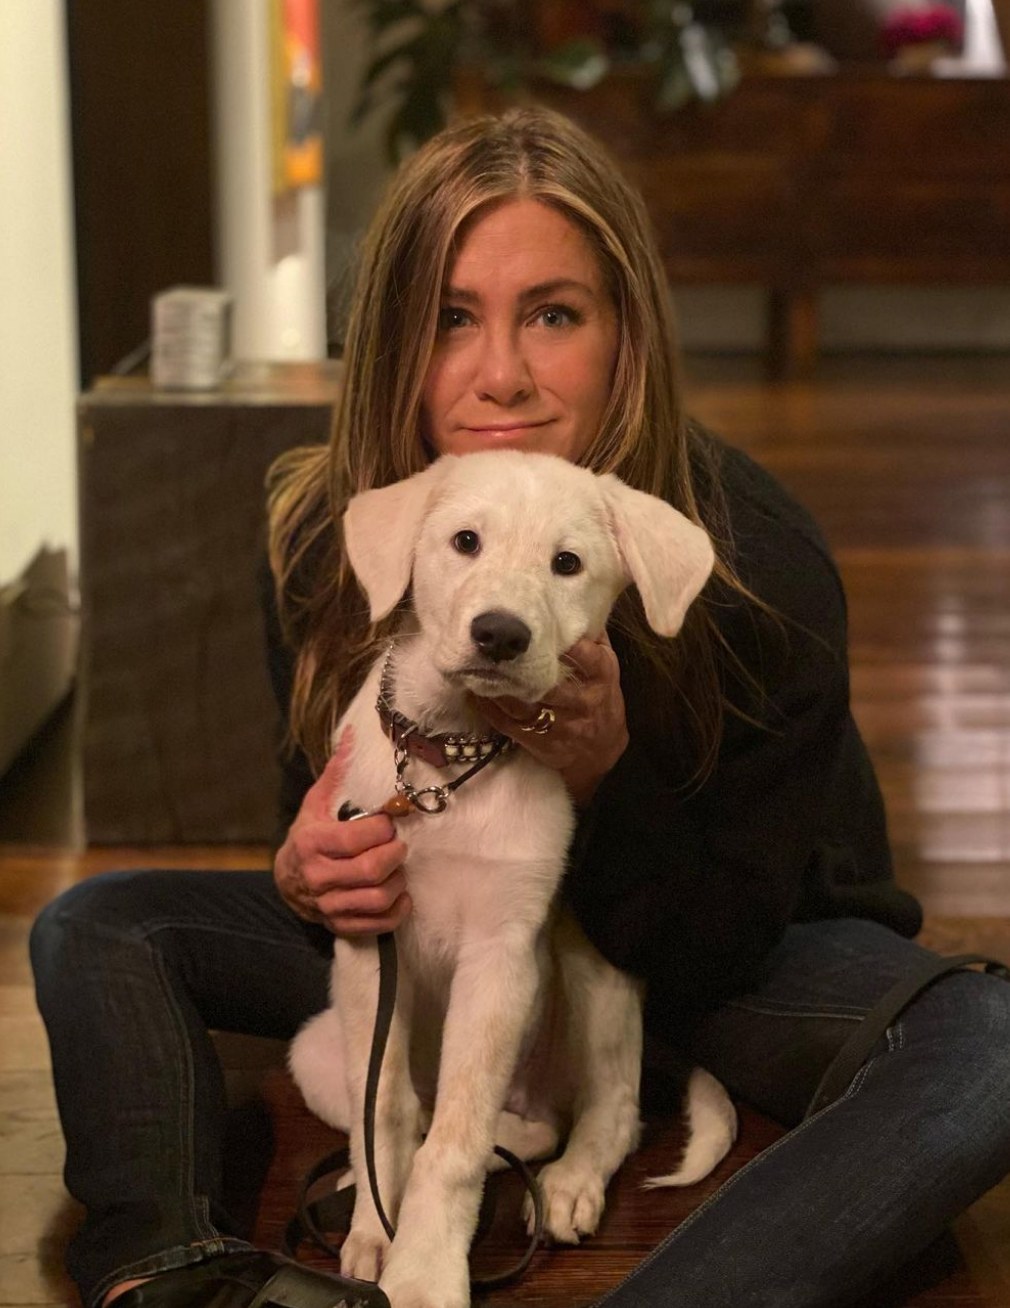 A photo posted by Jennifer Aniston to Instagram in November 2020 shows her dog Lord Chesterfield, whom she adopted in October 2020.